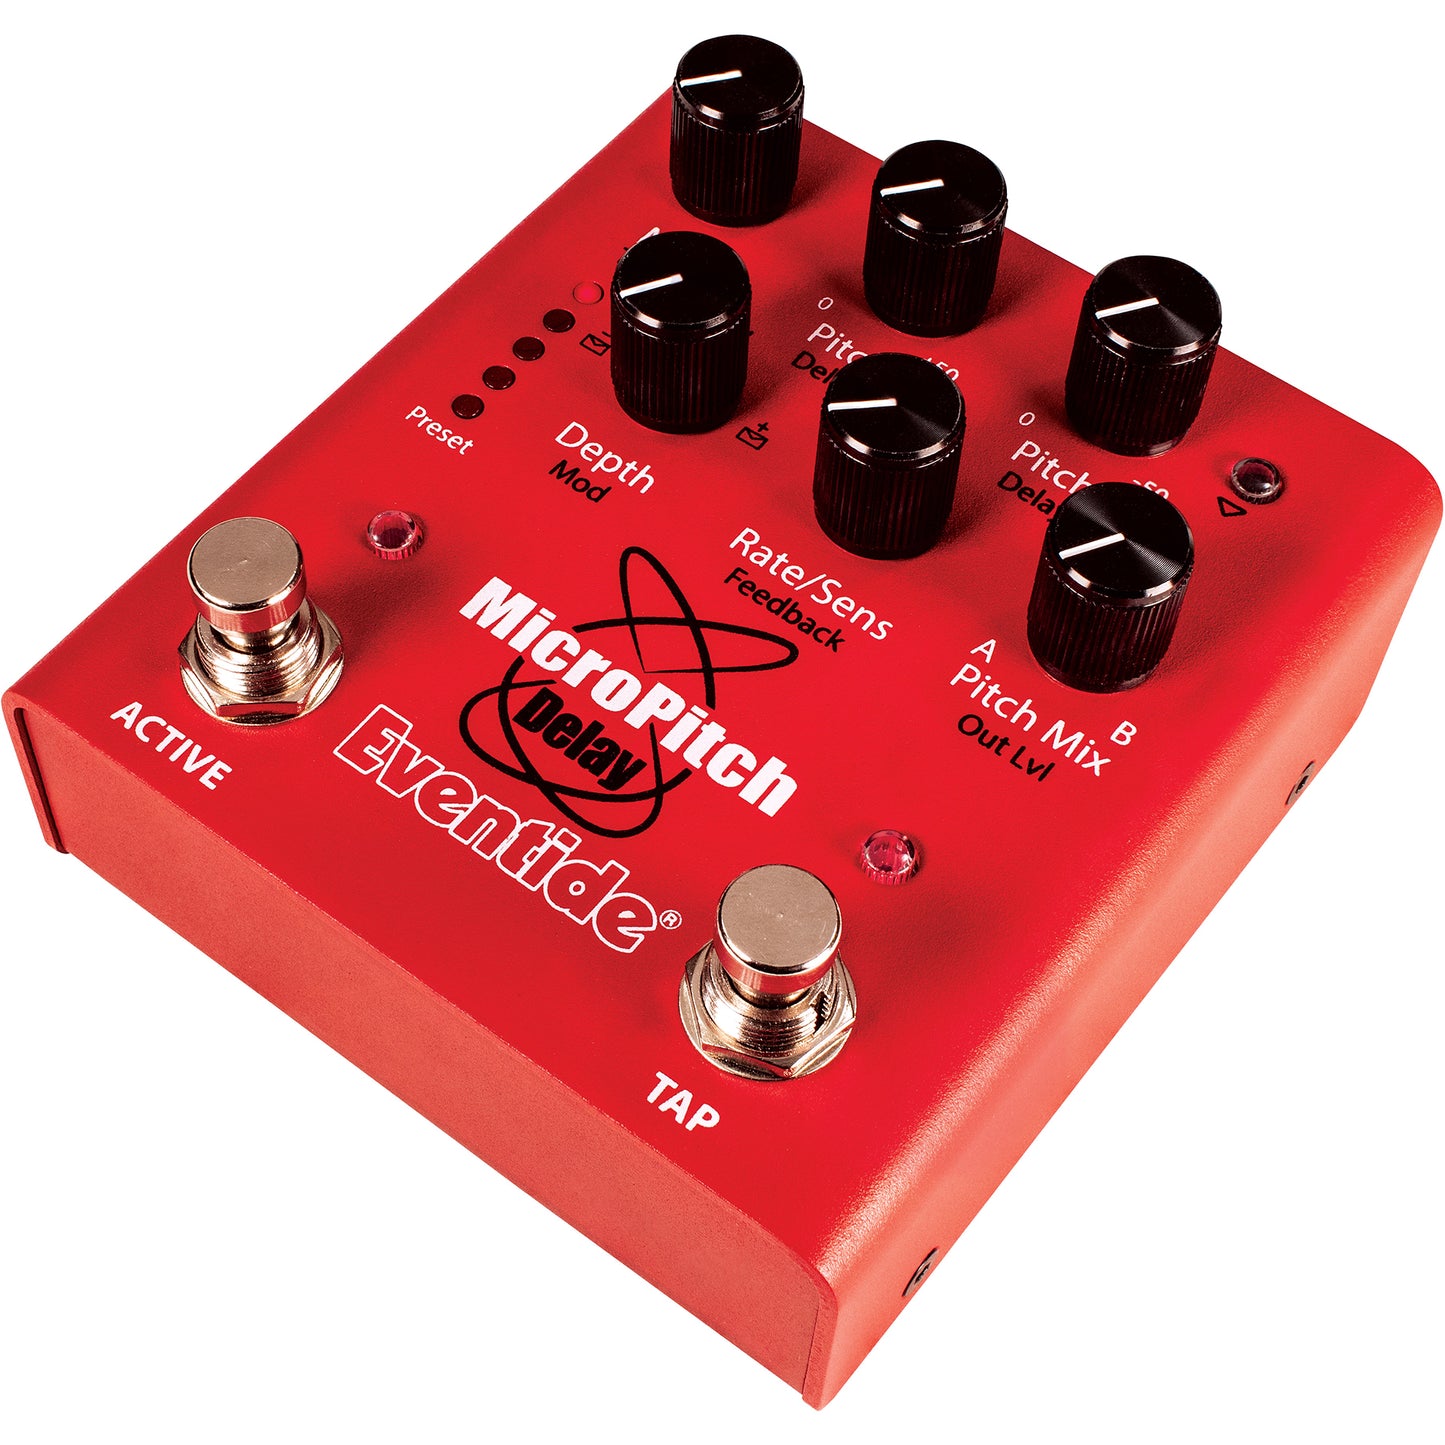 Eventide MicroPitch Delay Pedal